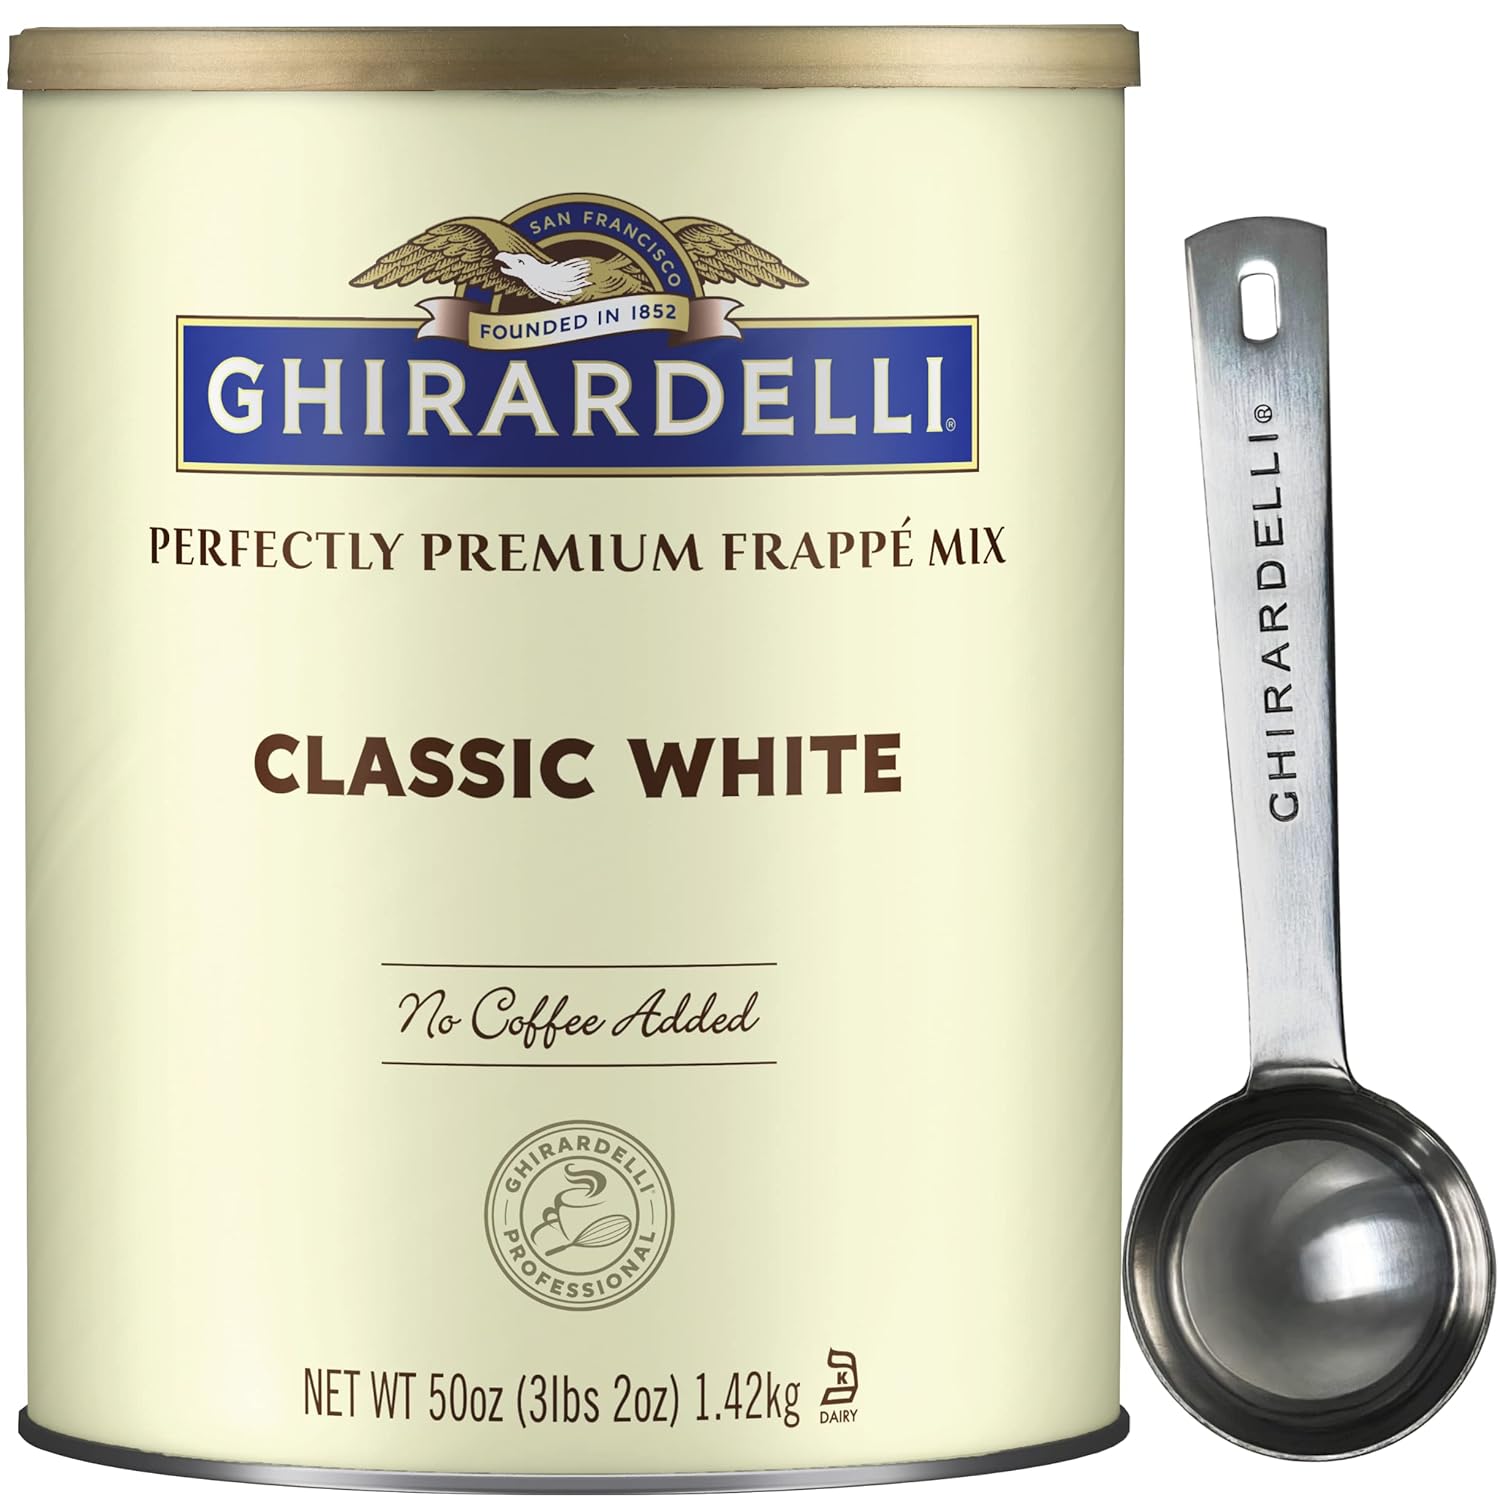 Ghirardelli Classic White Premium Frappé Mix, 3.12 lb Can with Ghirardelli Stamped Barista Spoon